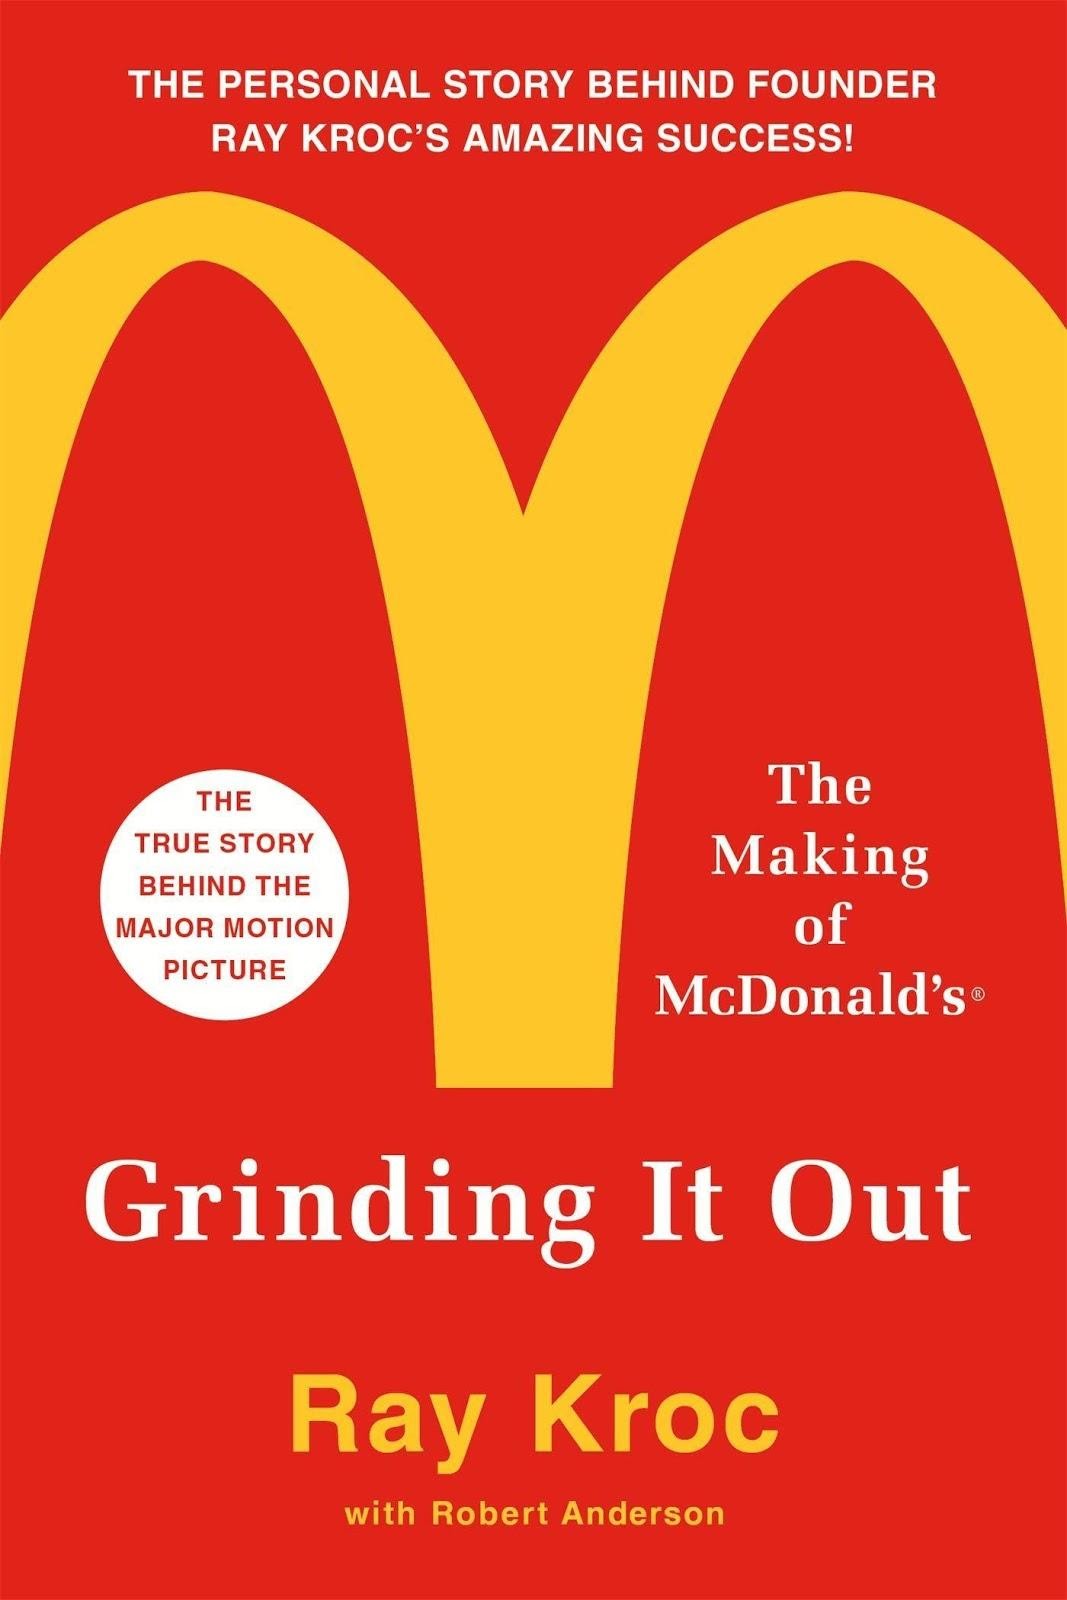 Libro “Grinding It Out”